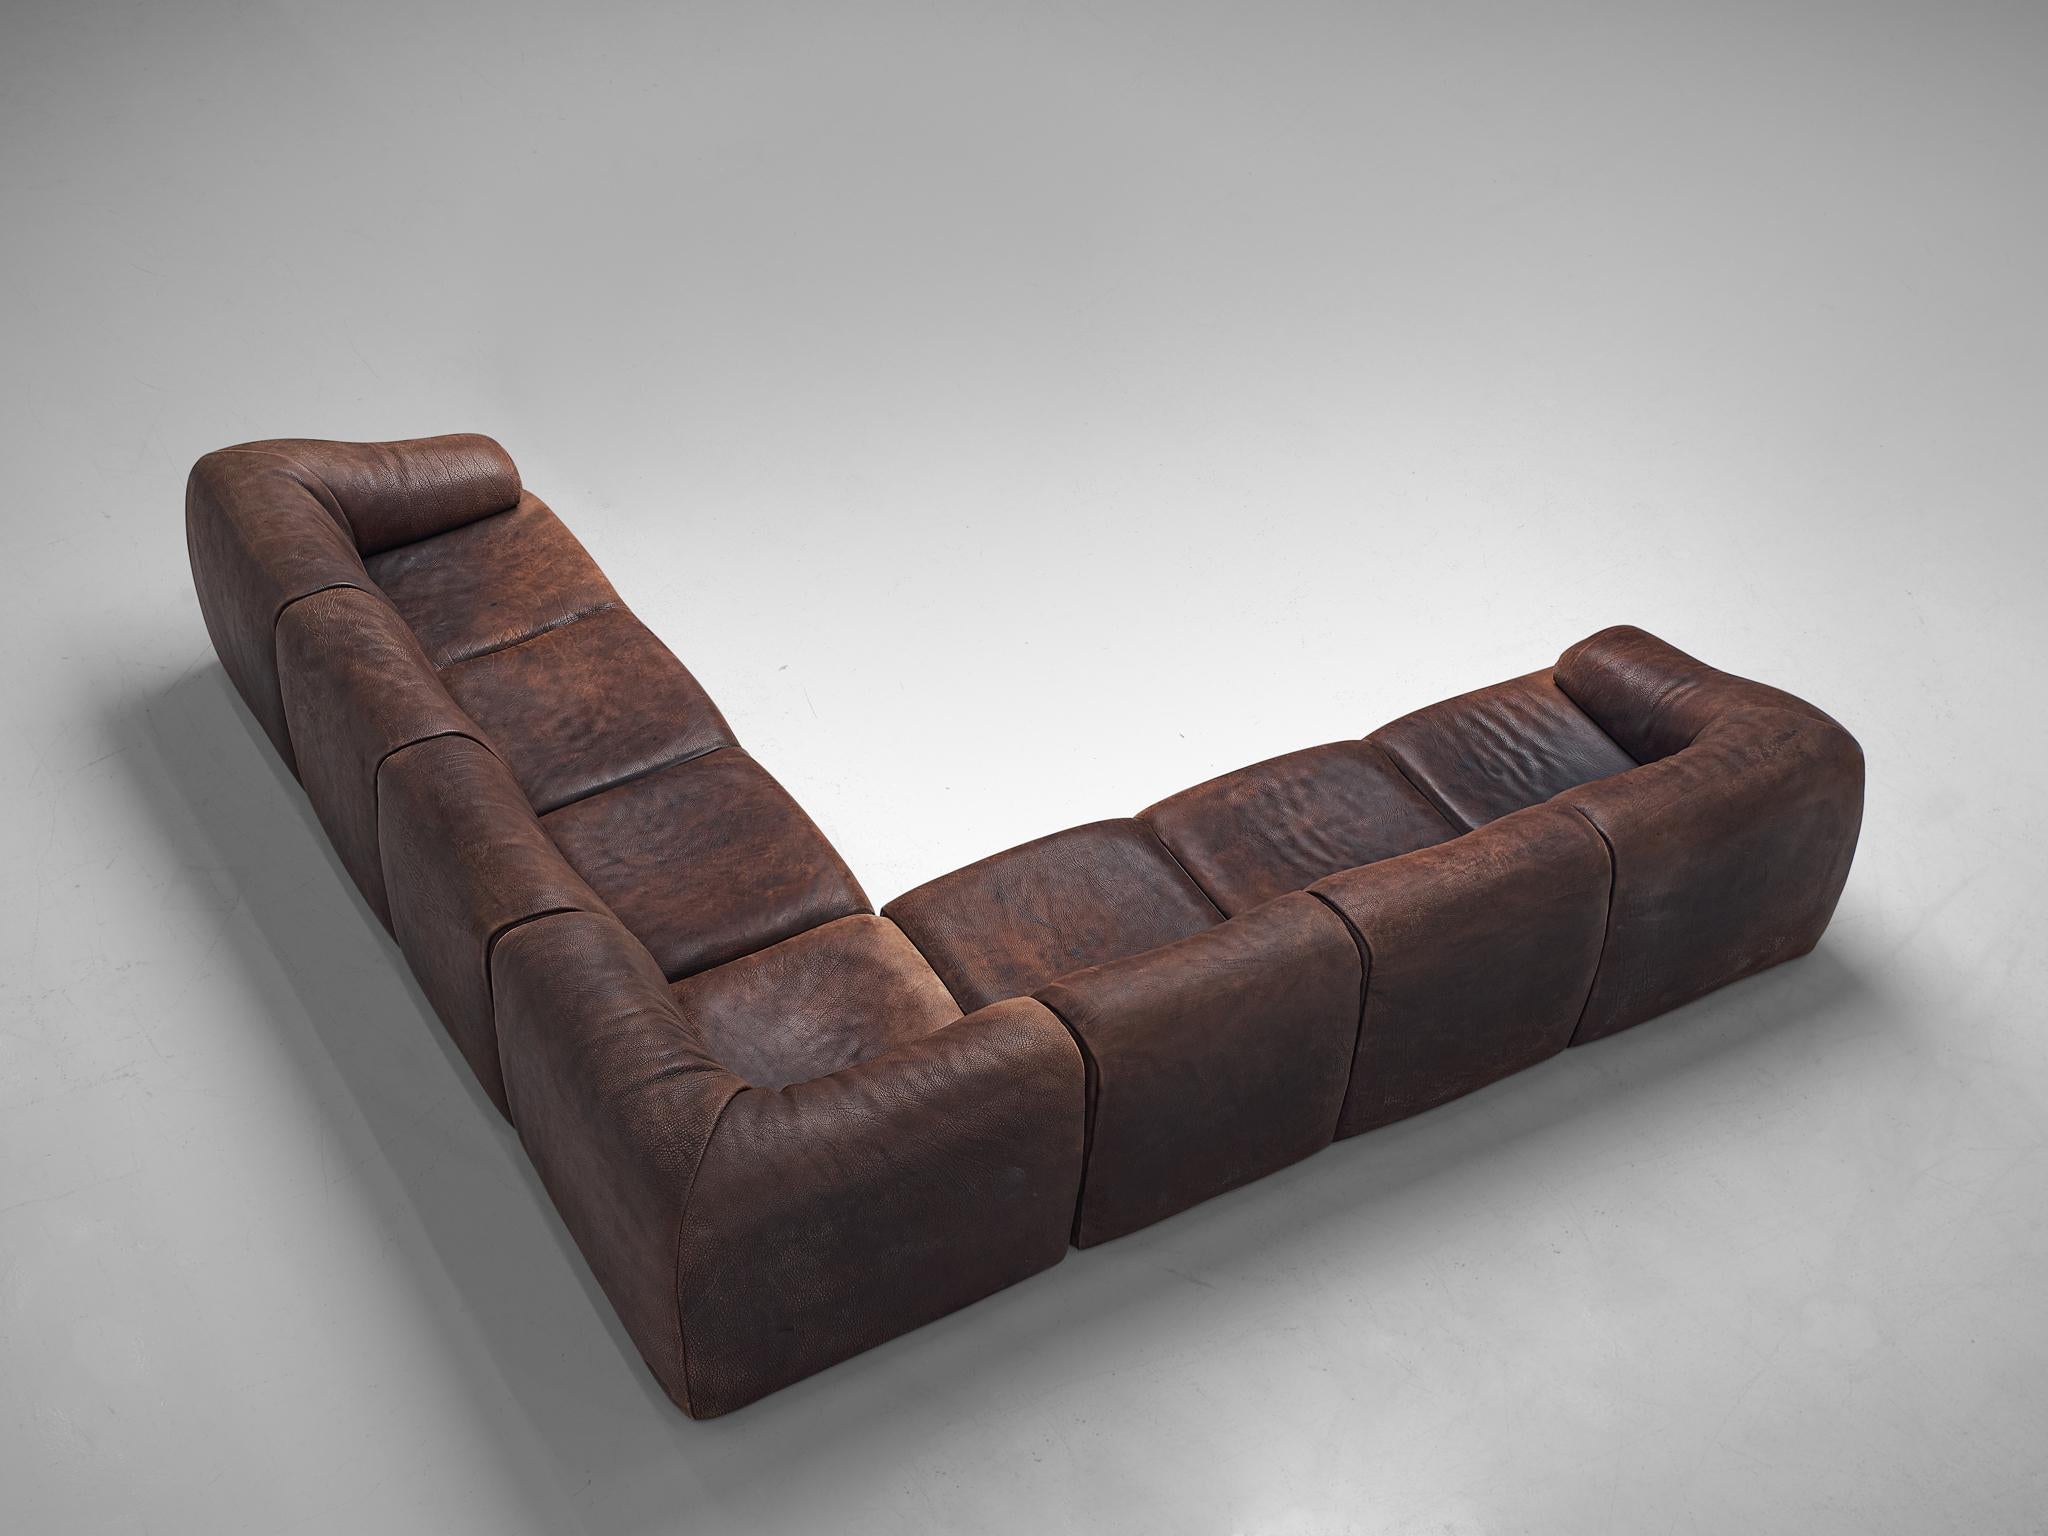 De Sede, lounge set, buffalo leather, Switzerland, circa 1970.

Comfortable lounge set designed and made by De Sede, Switzerland, 1970. The very comfortable sofa is upholstered in high quality brown buffalo leather, which has a beautiful patina.